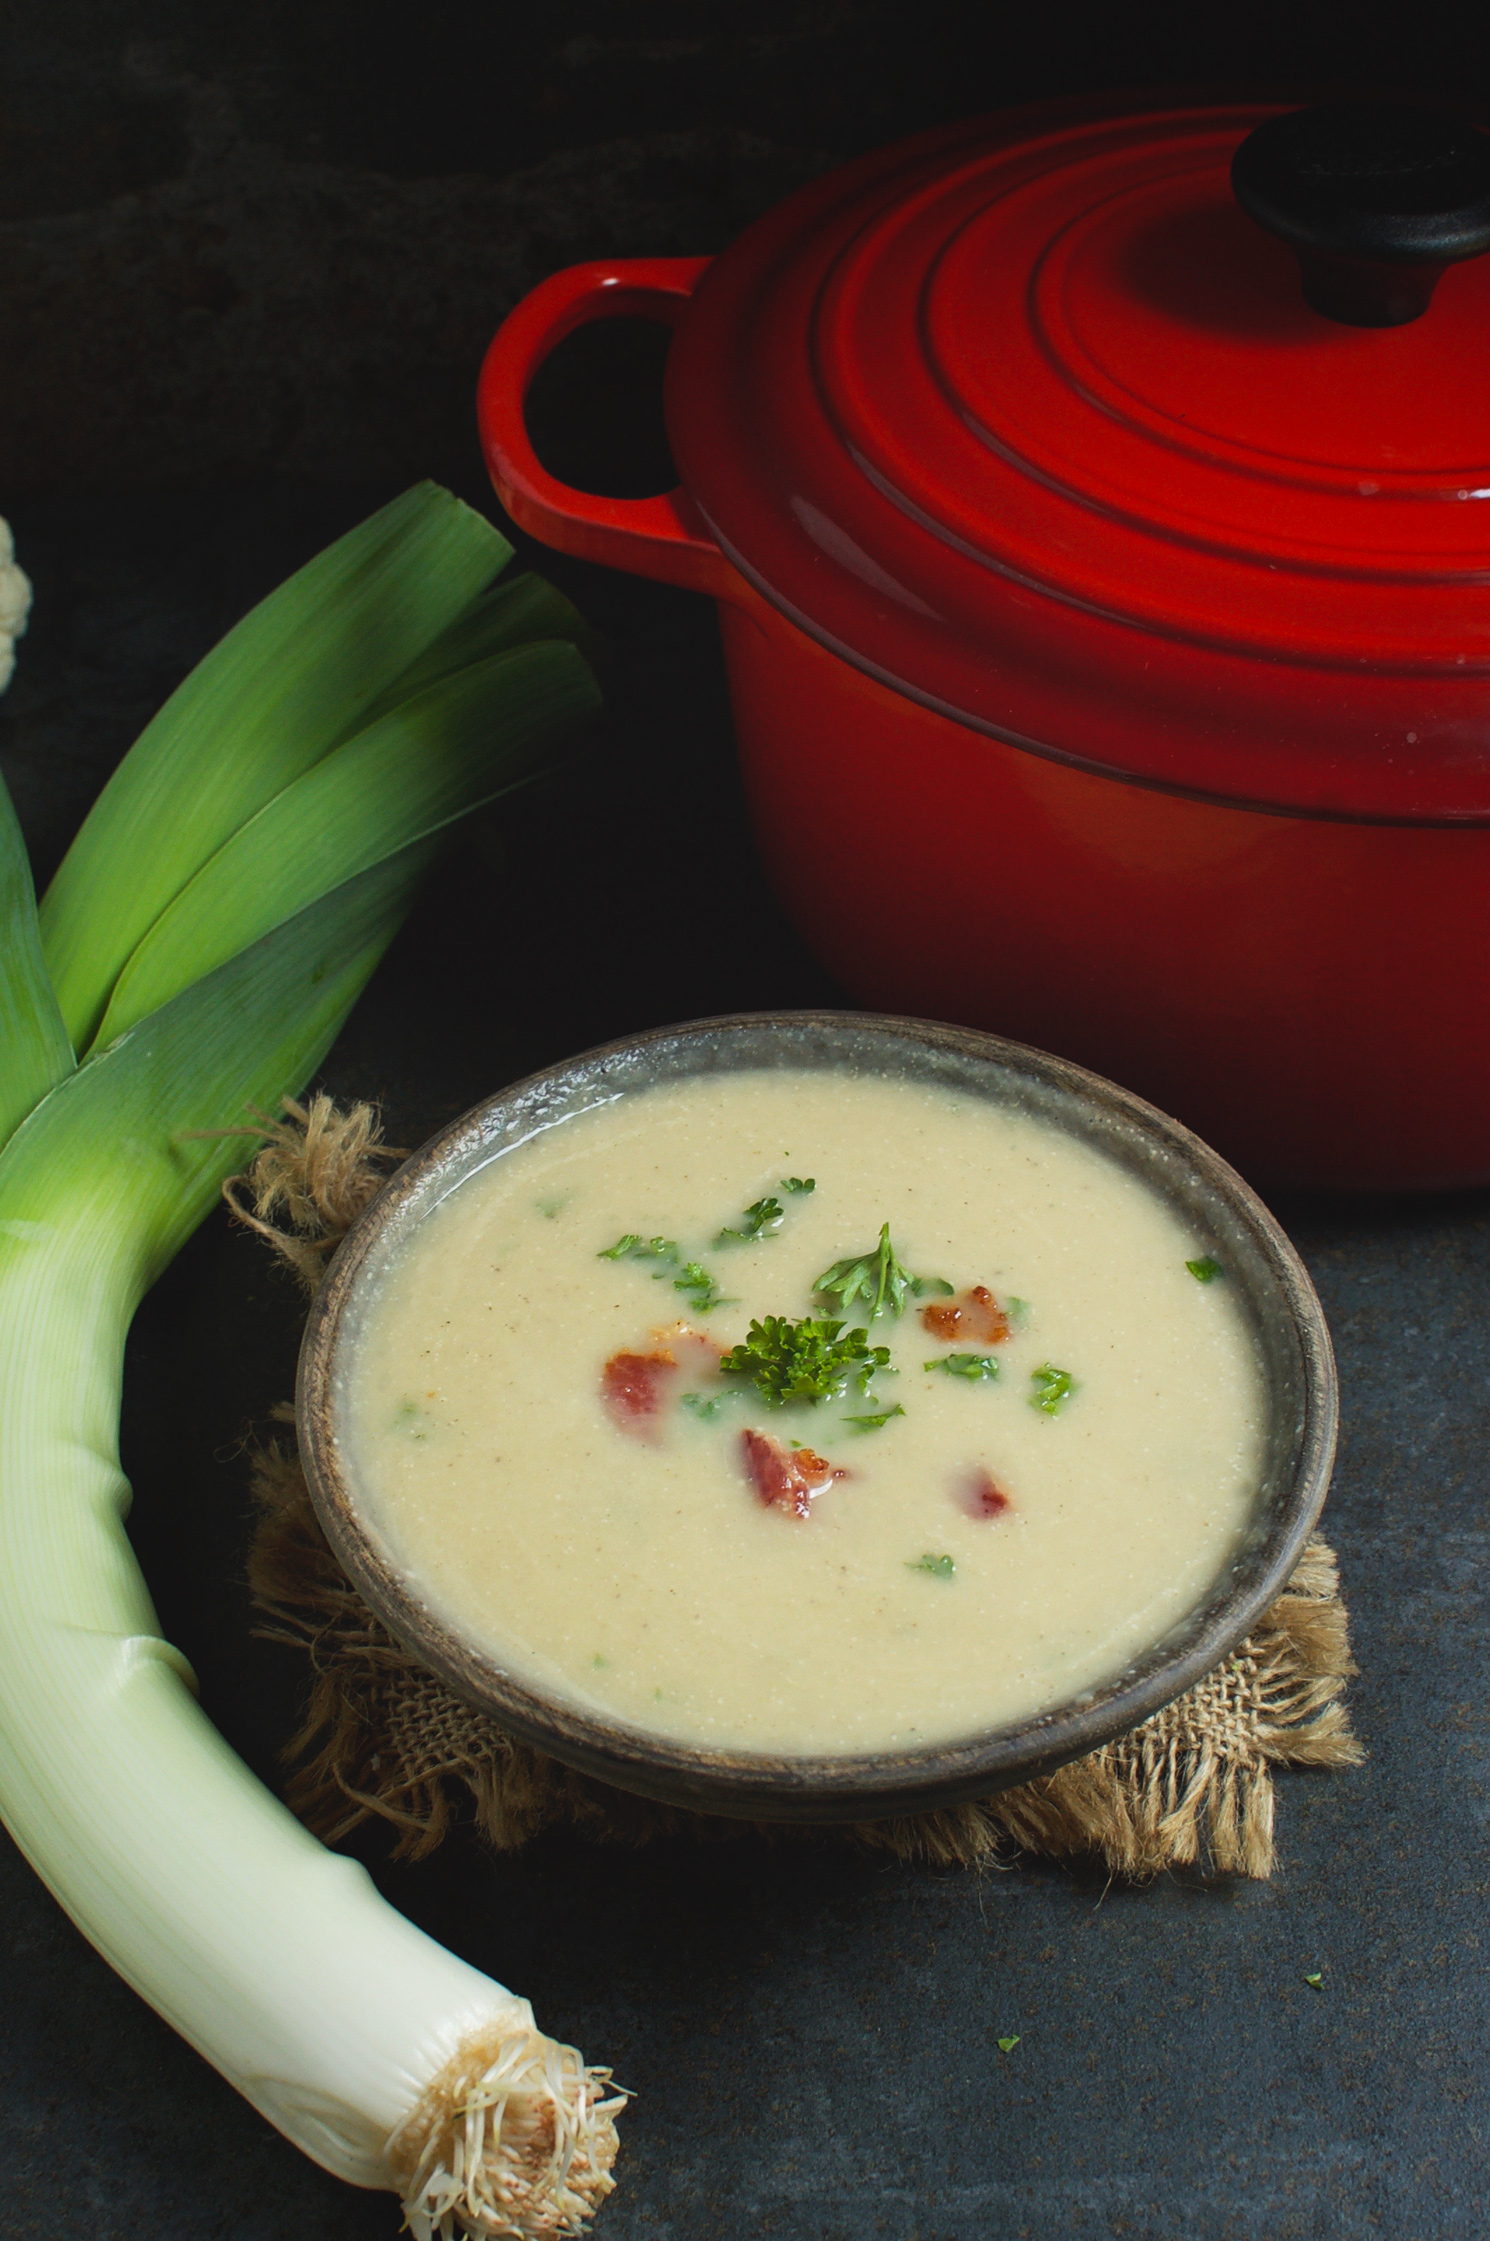 This Low-Carb "Potato" Leek Soup is a Paleo, low-carb, and dairy-free comfort food. No one will know this soup is made with cauliflower and not potatoes.